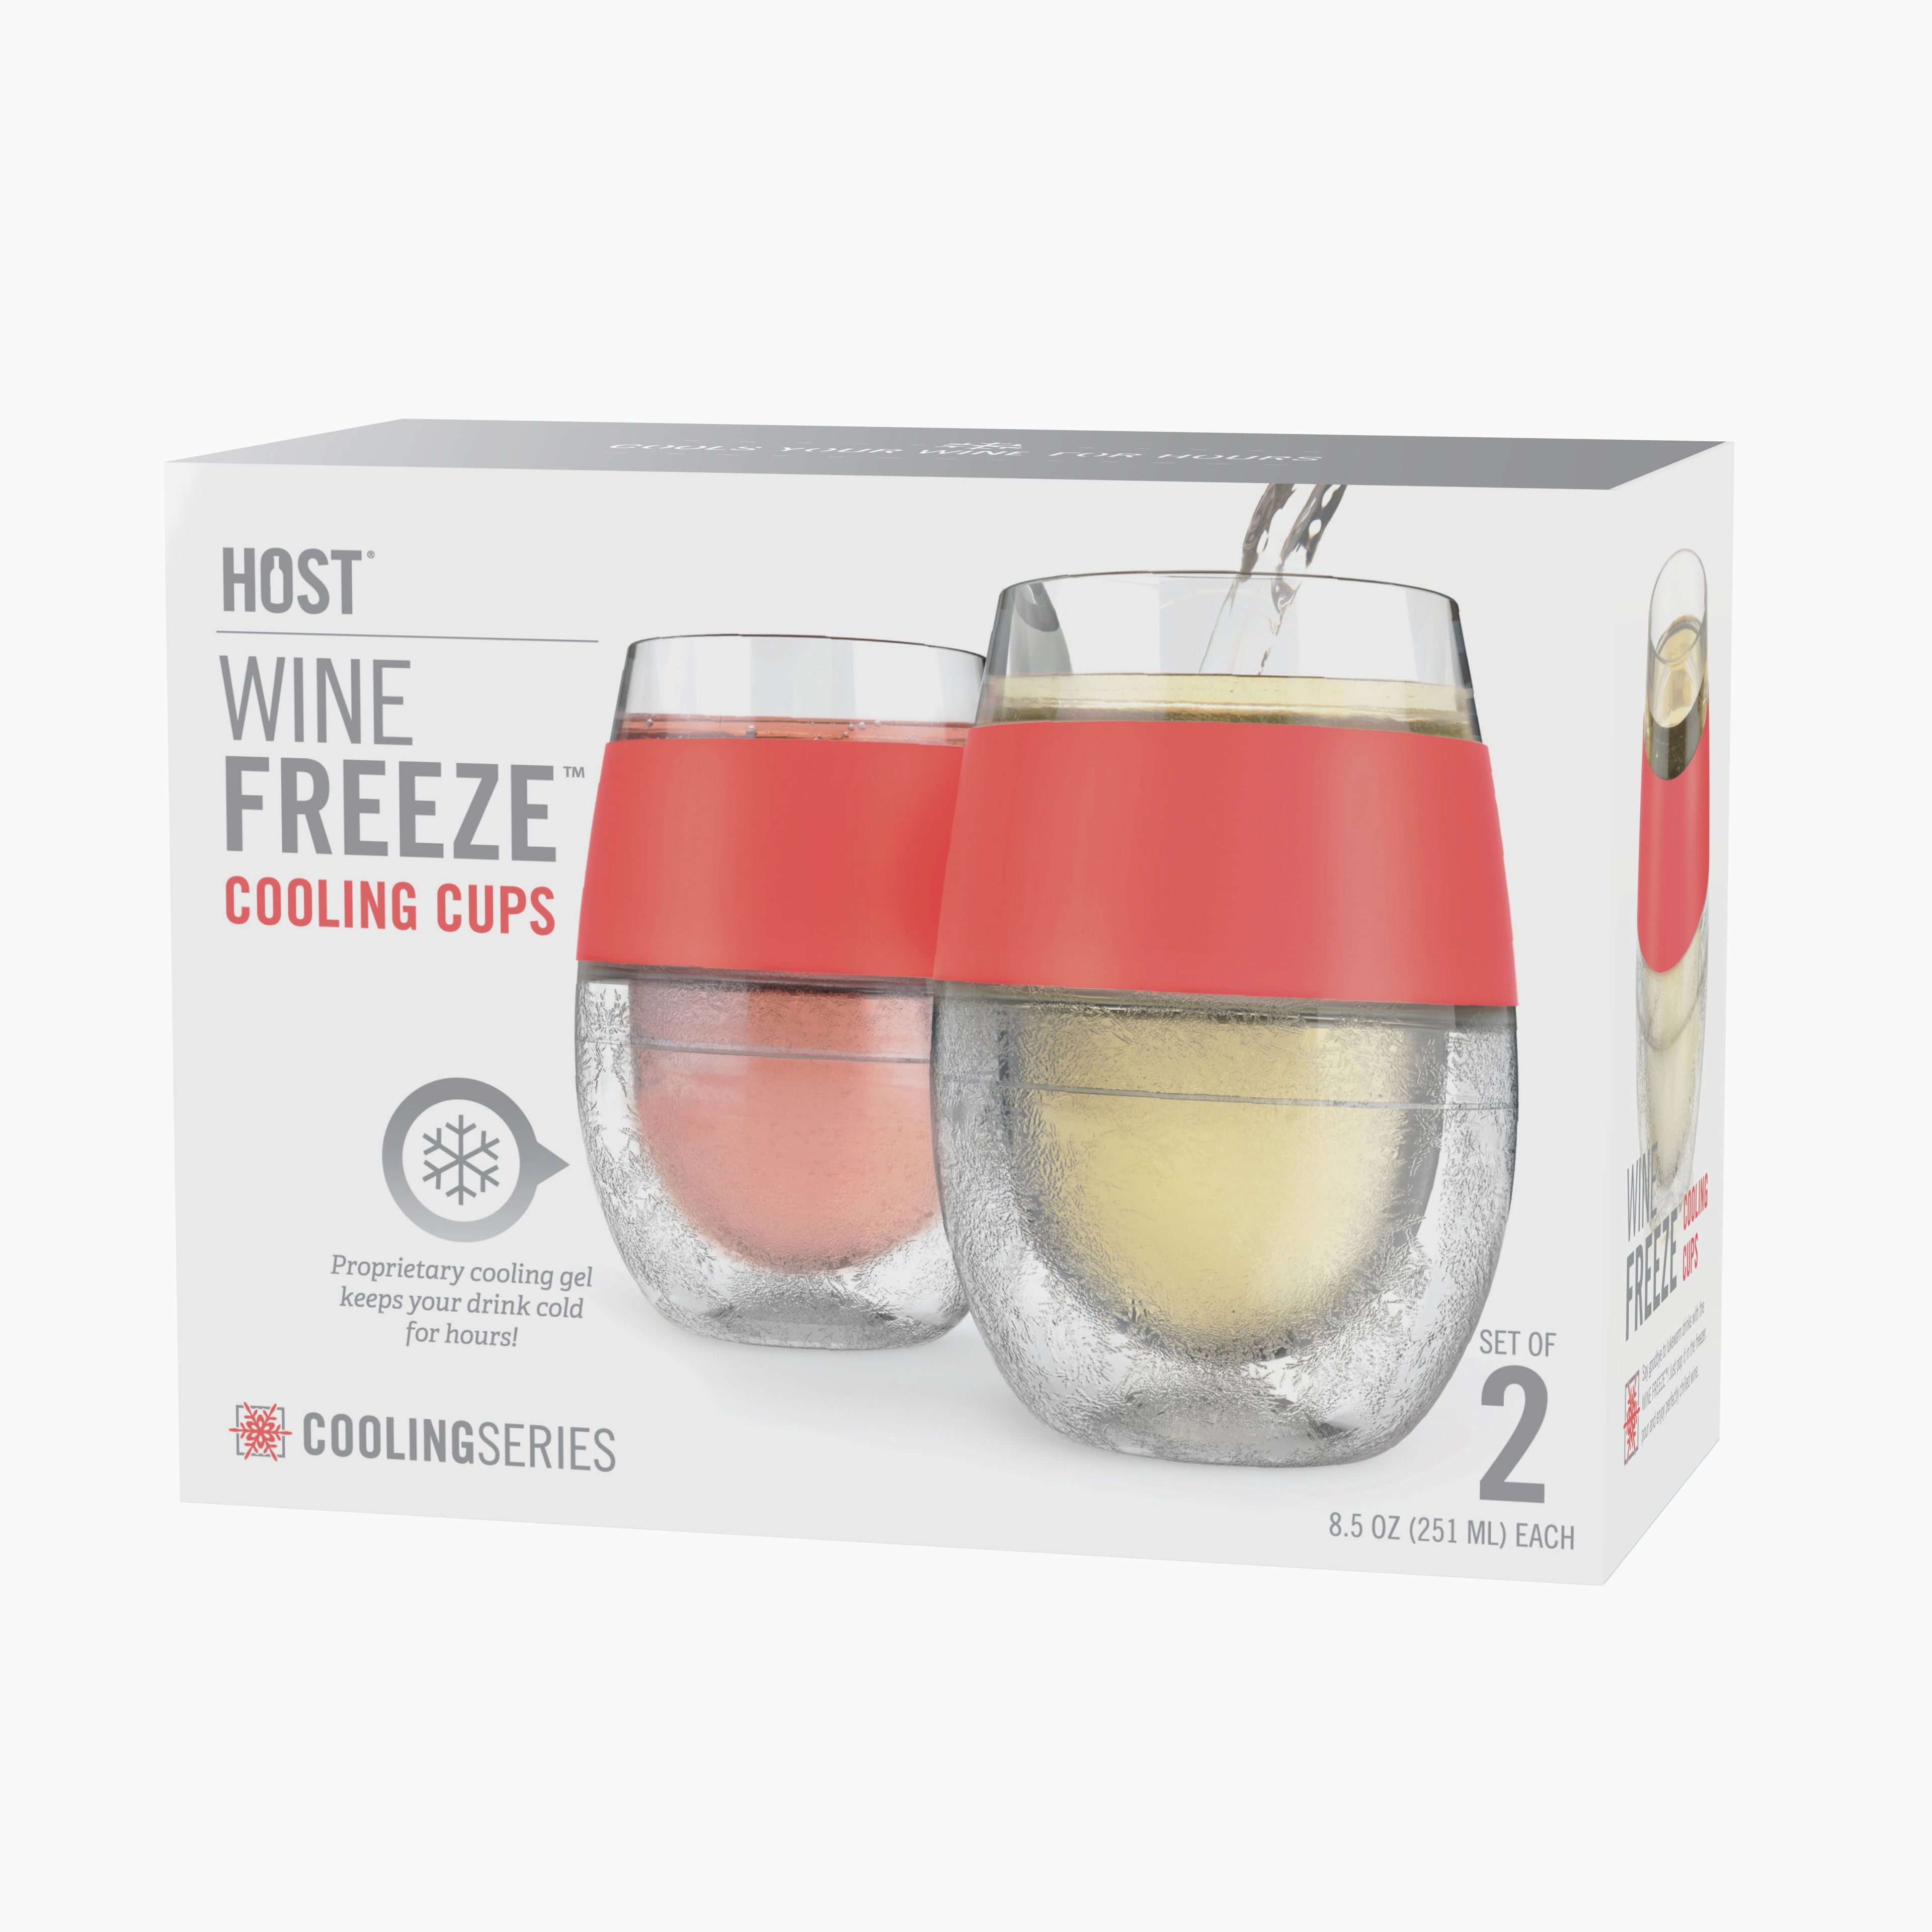 Wine FREEZE Cooling Cup in Coral, Set of 2